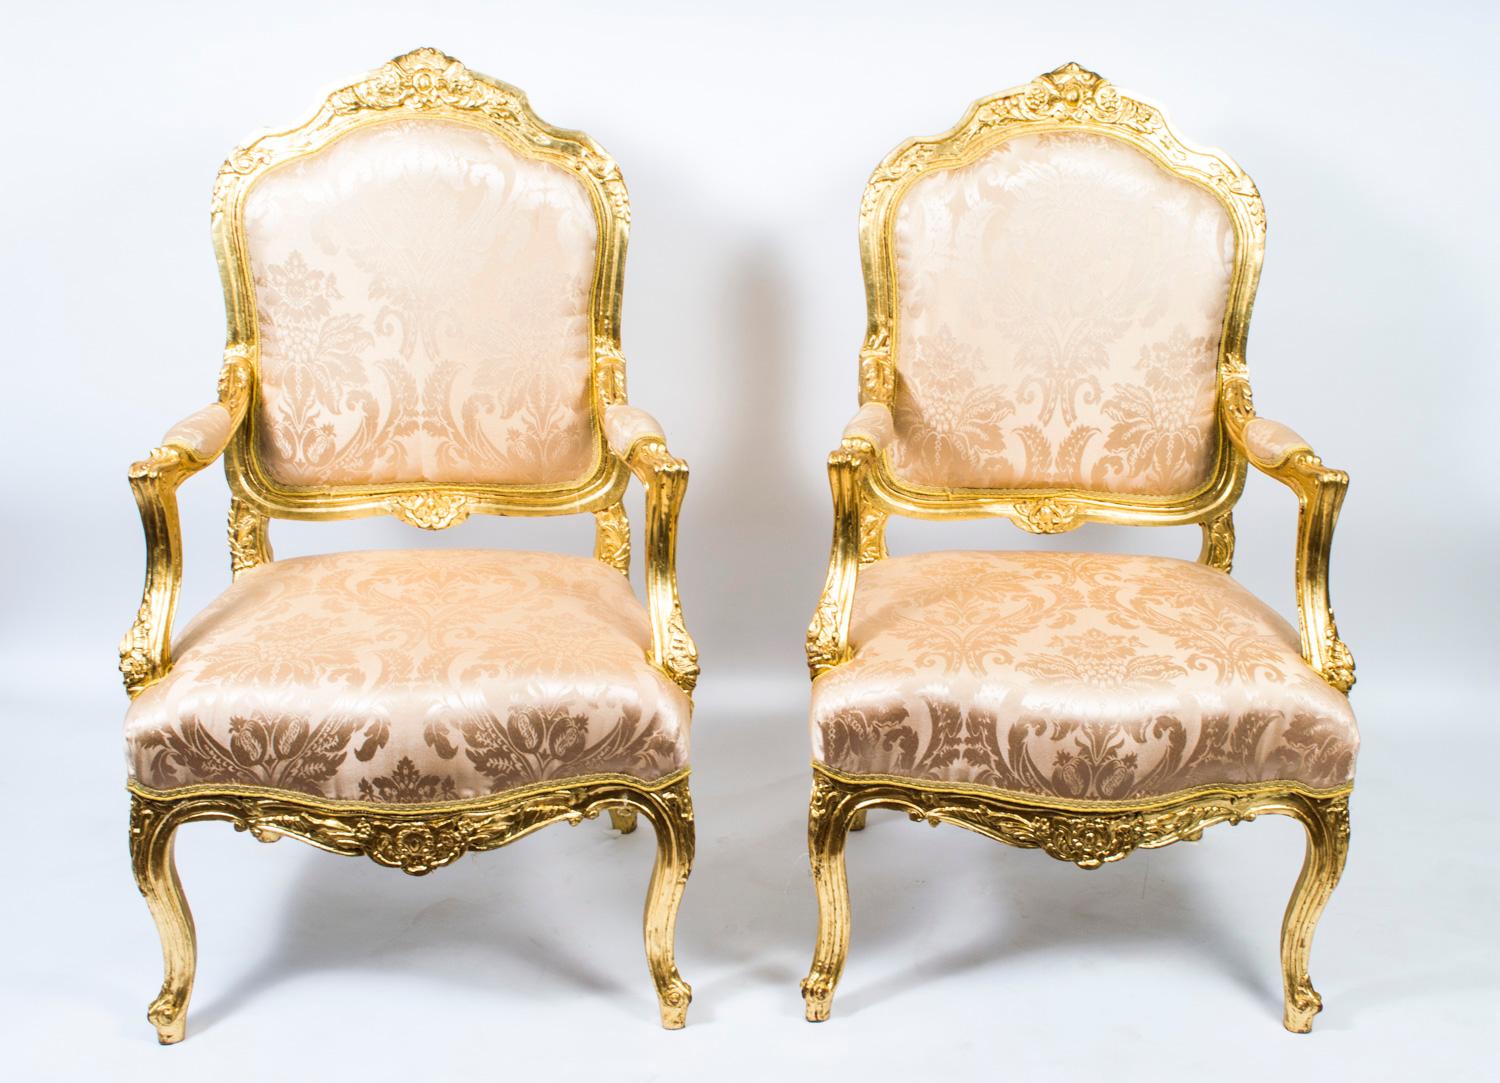 This is a stunning pair of French carved giltwood armchairs in the Louis XV style and dating from the last quarter of the 20th century.  

The chairs feature hand-carved decoration and have been reupholstered in a gorgeous patterned fabric.

Add a